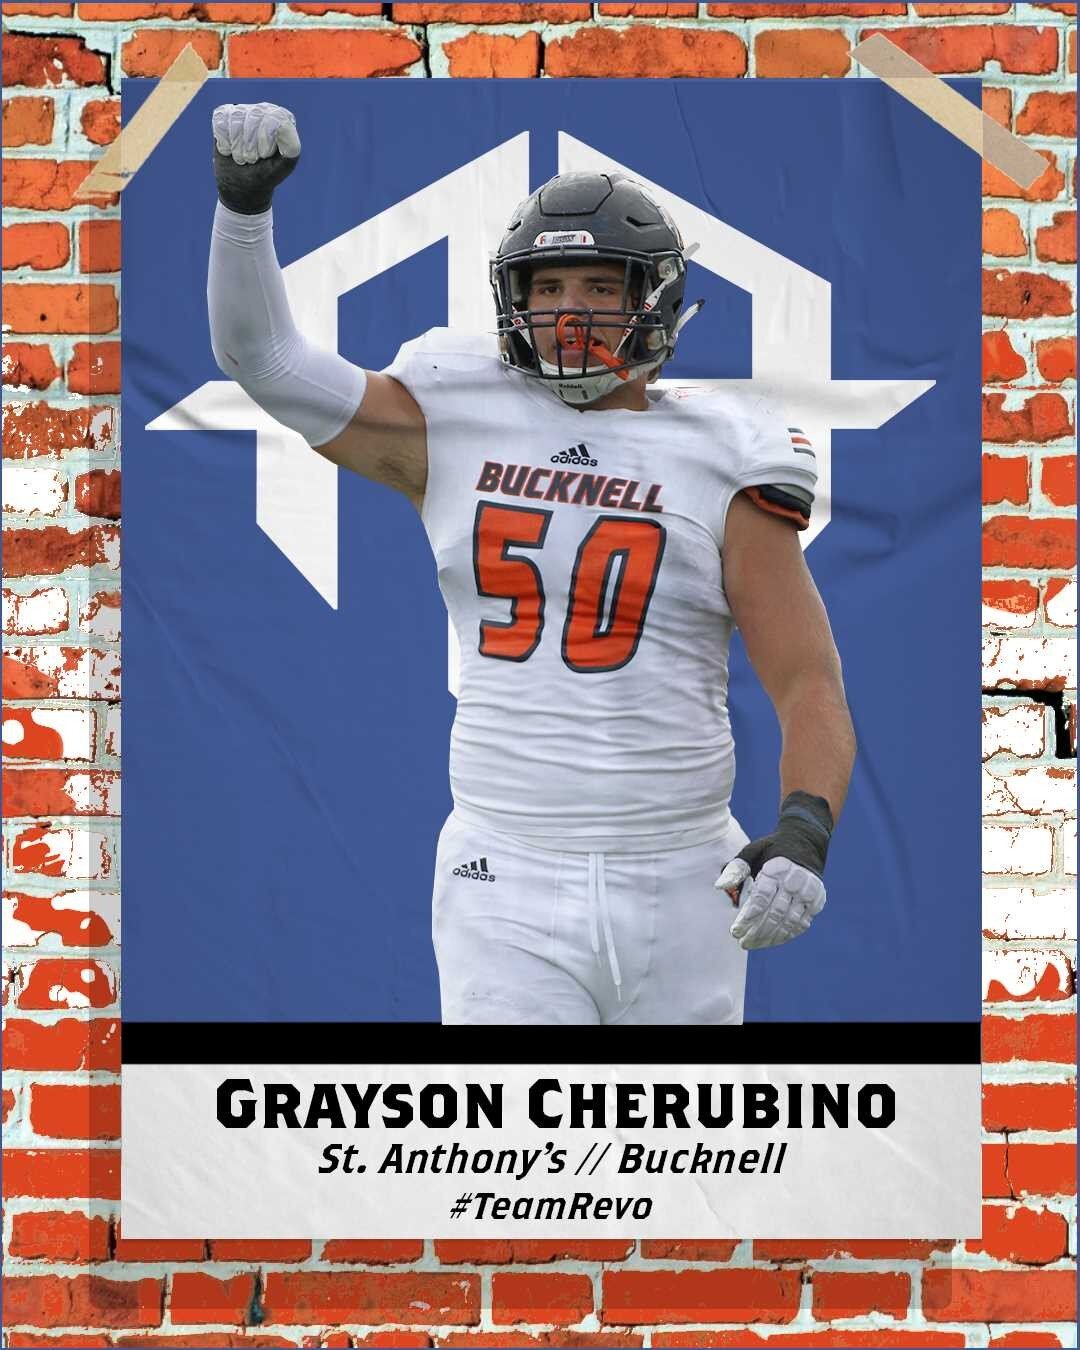 Shoutout to @graysoncherubino on being named captain for @bucknell_fb for the upcoming season 👏

Grayson's been an absolute force on Bucknell's defensive line since day 1. Through 24 games played he's racked up 73 tackles, 6.5 sacks, and 3 forced fu